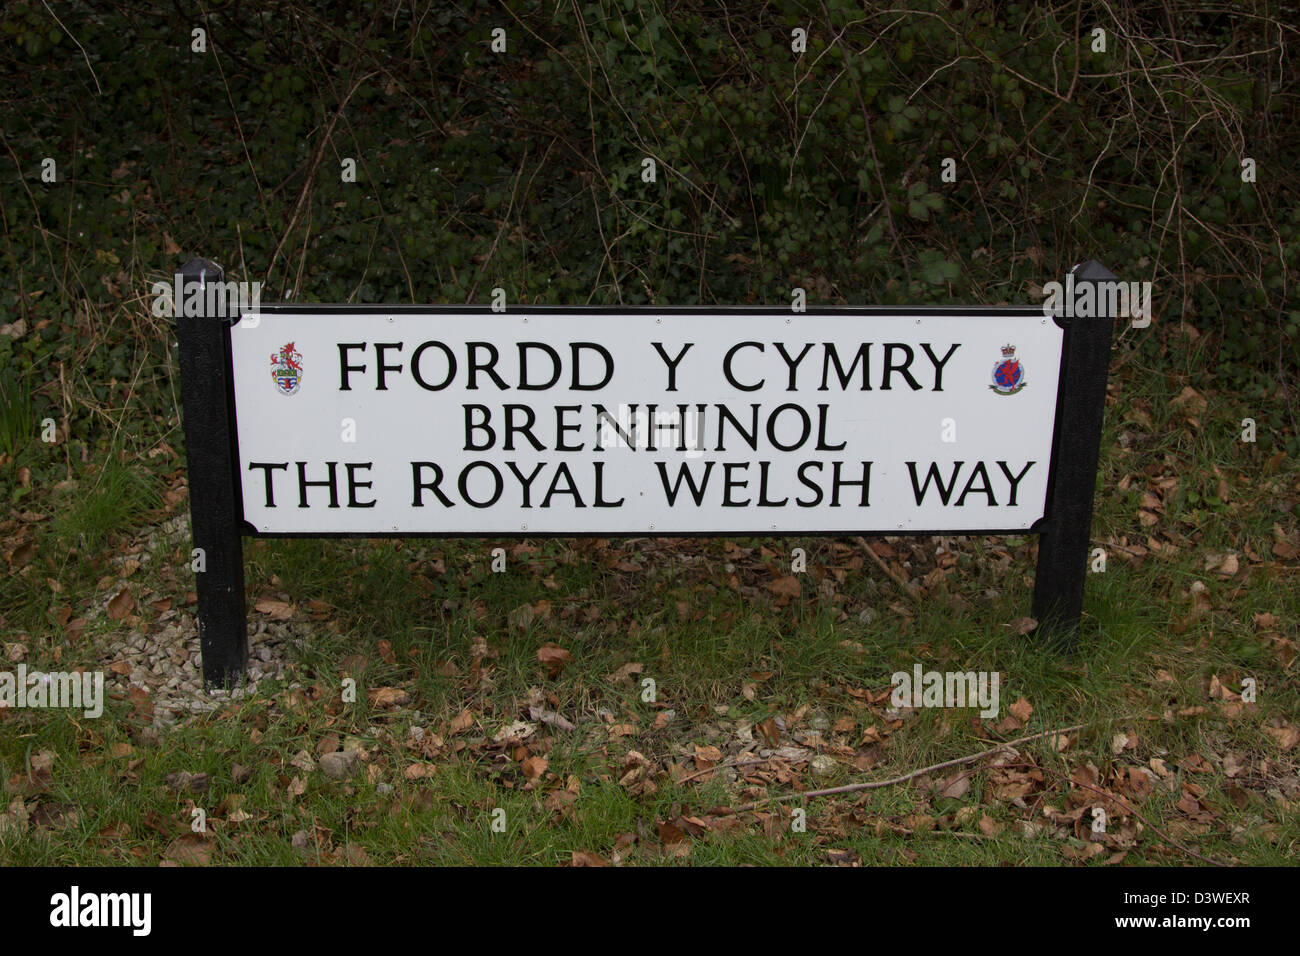 Ffordd y Cymry Brenhinol: The Royal Welsh Way, A470 Llandudno. The road has been named in honour of the Royal Welsh Fusiliers Stock Photo